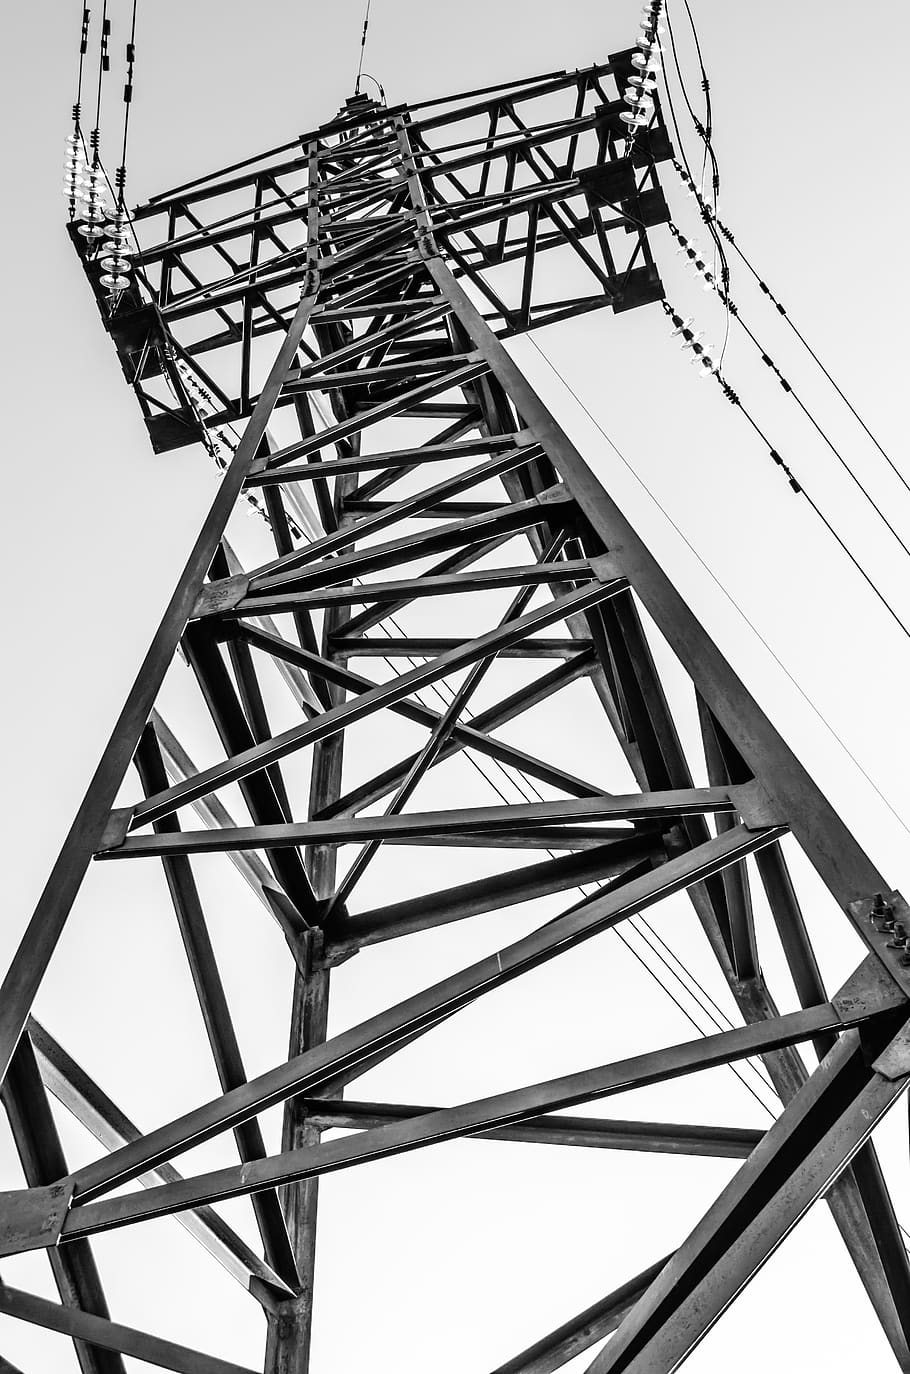 derrick, electricity, cable, high-voltage tower, energy, sky, black and white, low angle view, metal, built structure